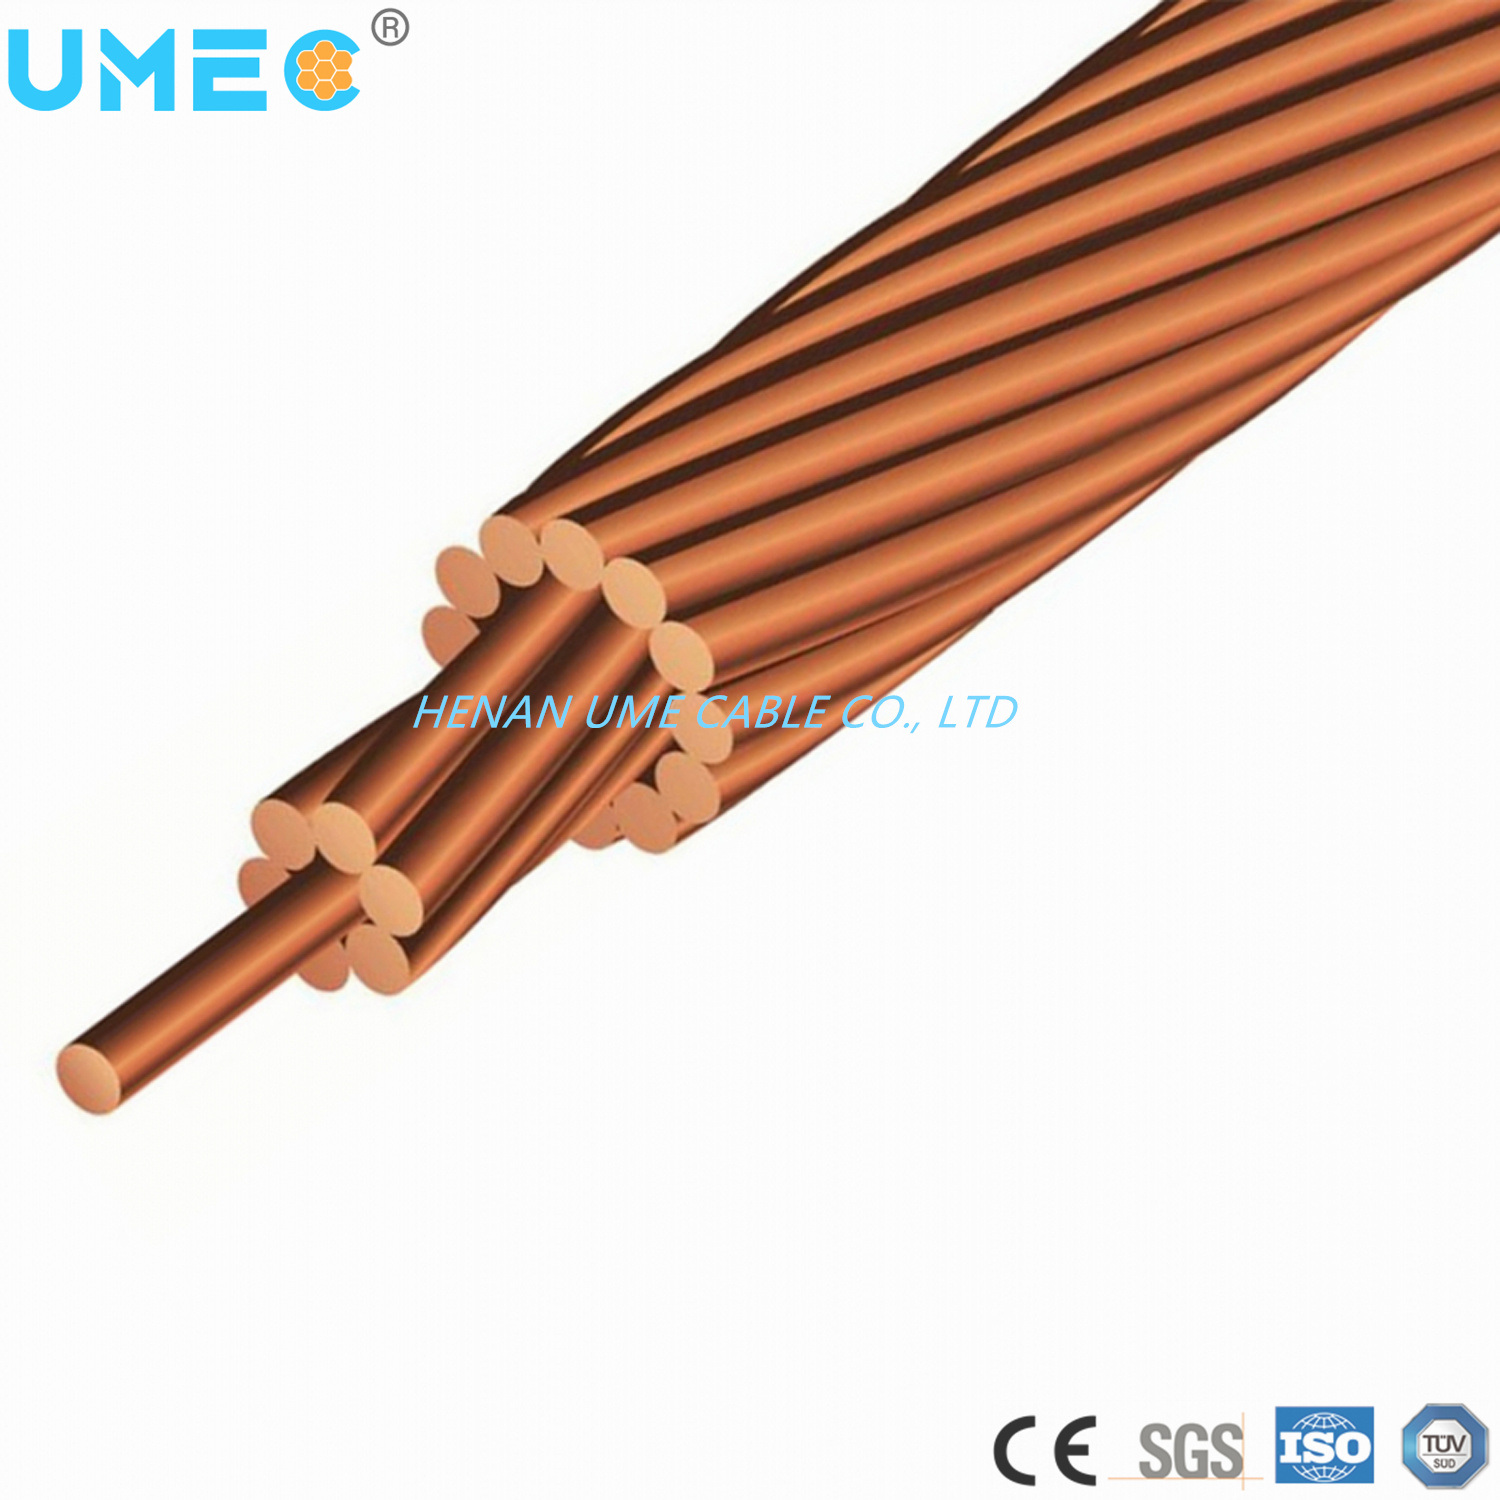 Grounding Electrical System Overhead Electrical Transmission Line Bare Conductor Hard Drawn Copper